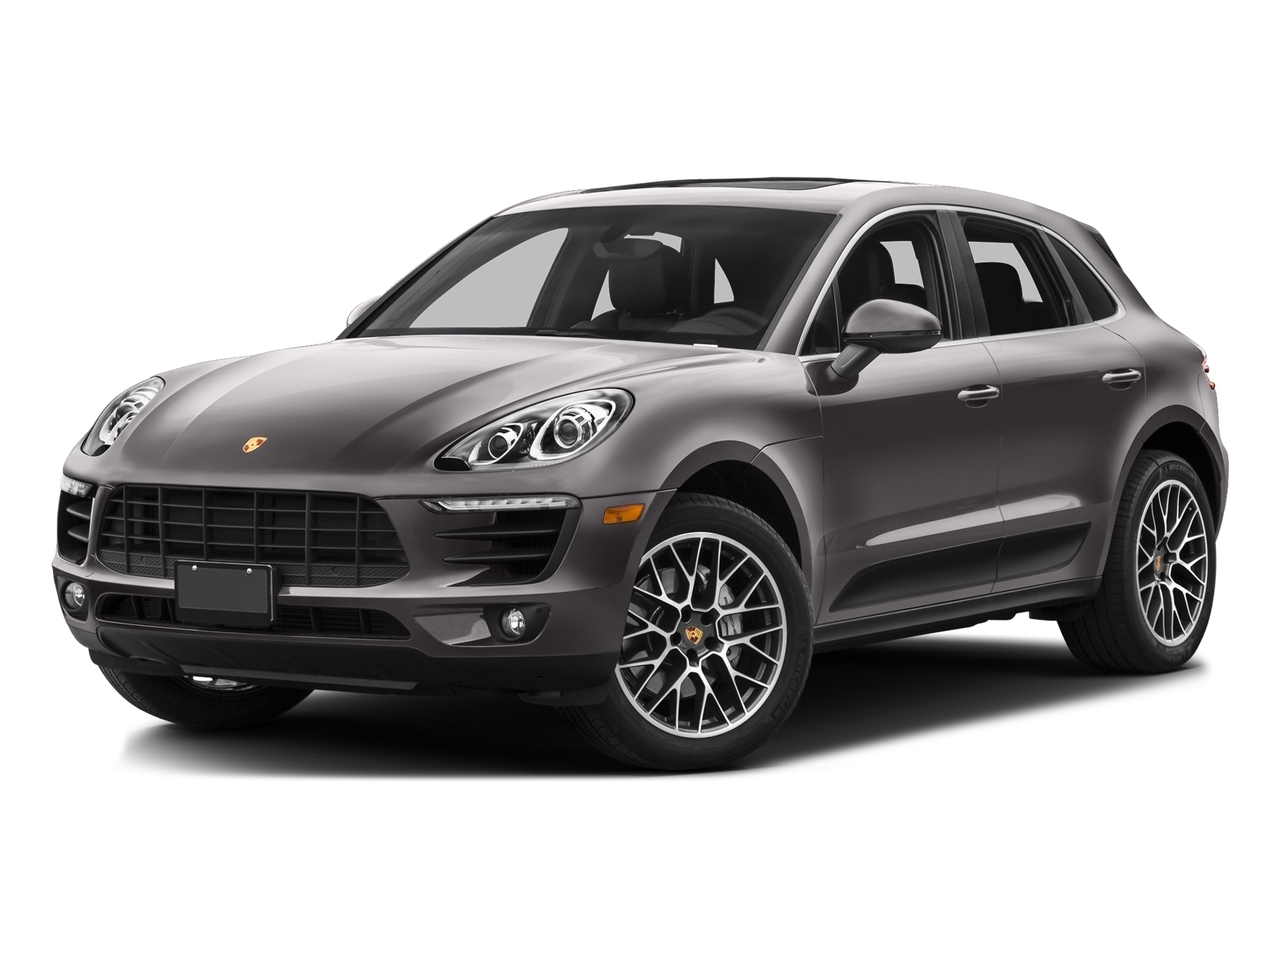 2016 Porsche Macan | 2 Year Extended Warranty Included